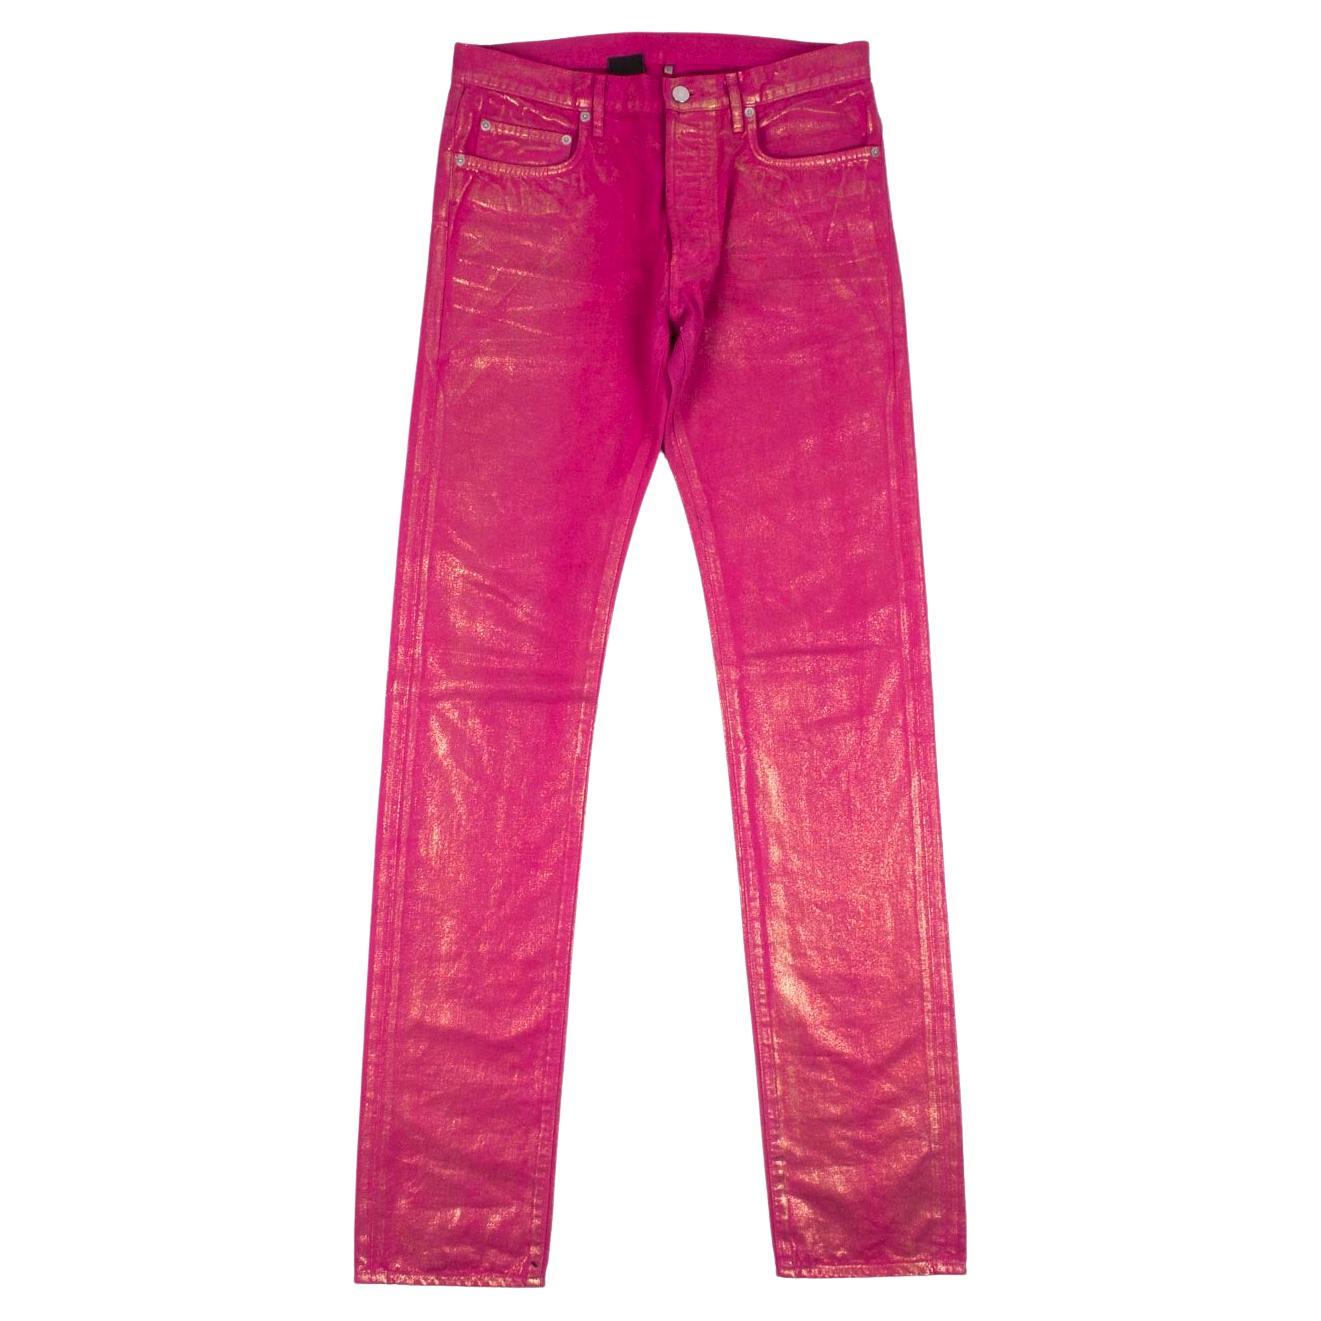 Dior Homme Shiny Glitter Men Jeans Size 31W For Sale